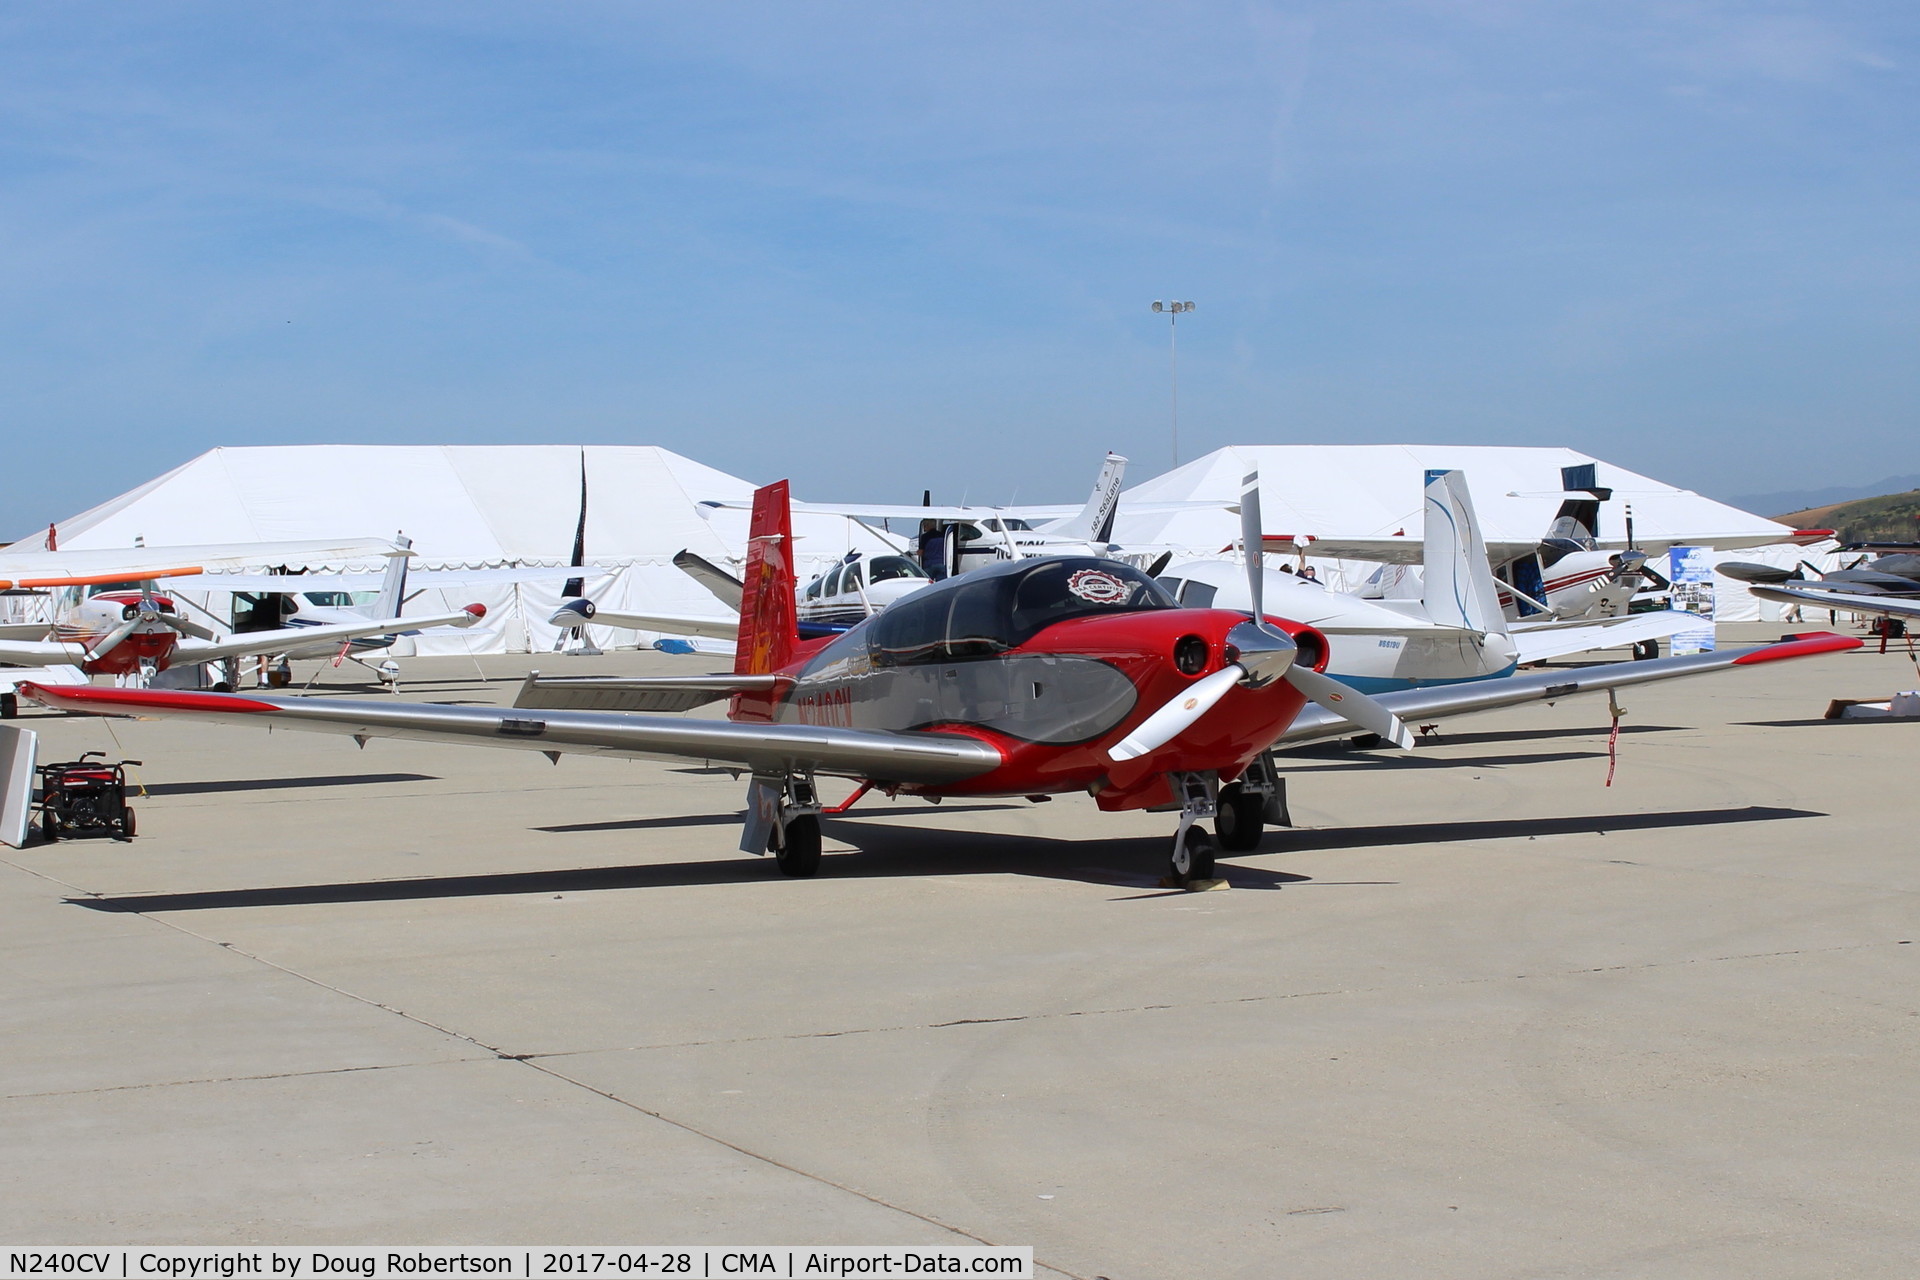 N240CV, 2015 Mooney M20V C/N 33-0001, 2015 Mooney M20V ACCLAIM ULTRA, Continental TSIO-550G 280 Hp, Turbo-normalized, 276 mph/242 kts max, composite fuselage, metal wings, tail, 2 doors. at AOPA FLY-IN.